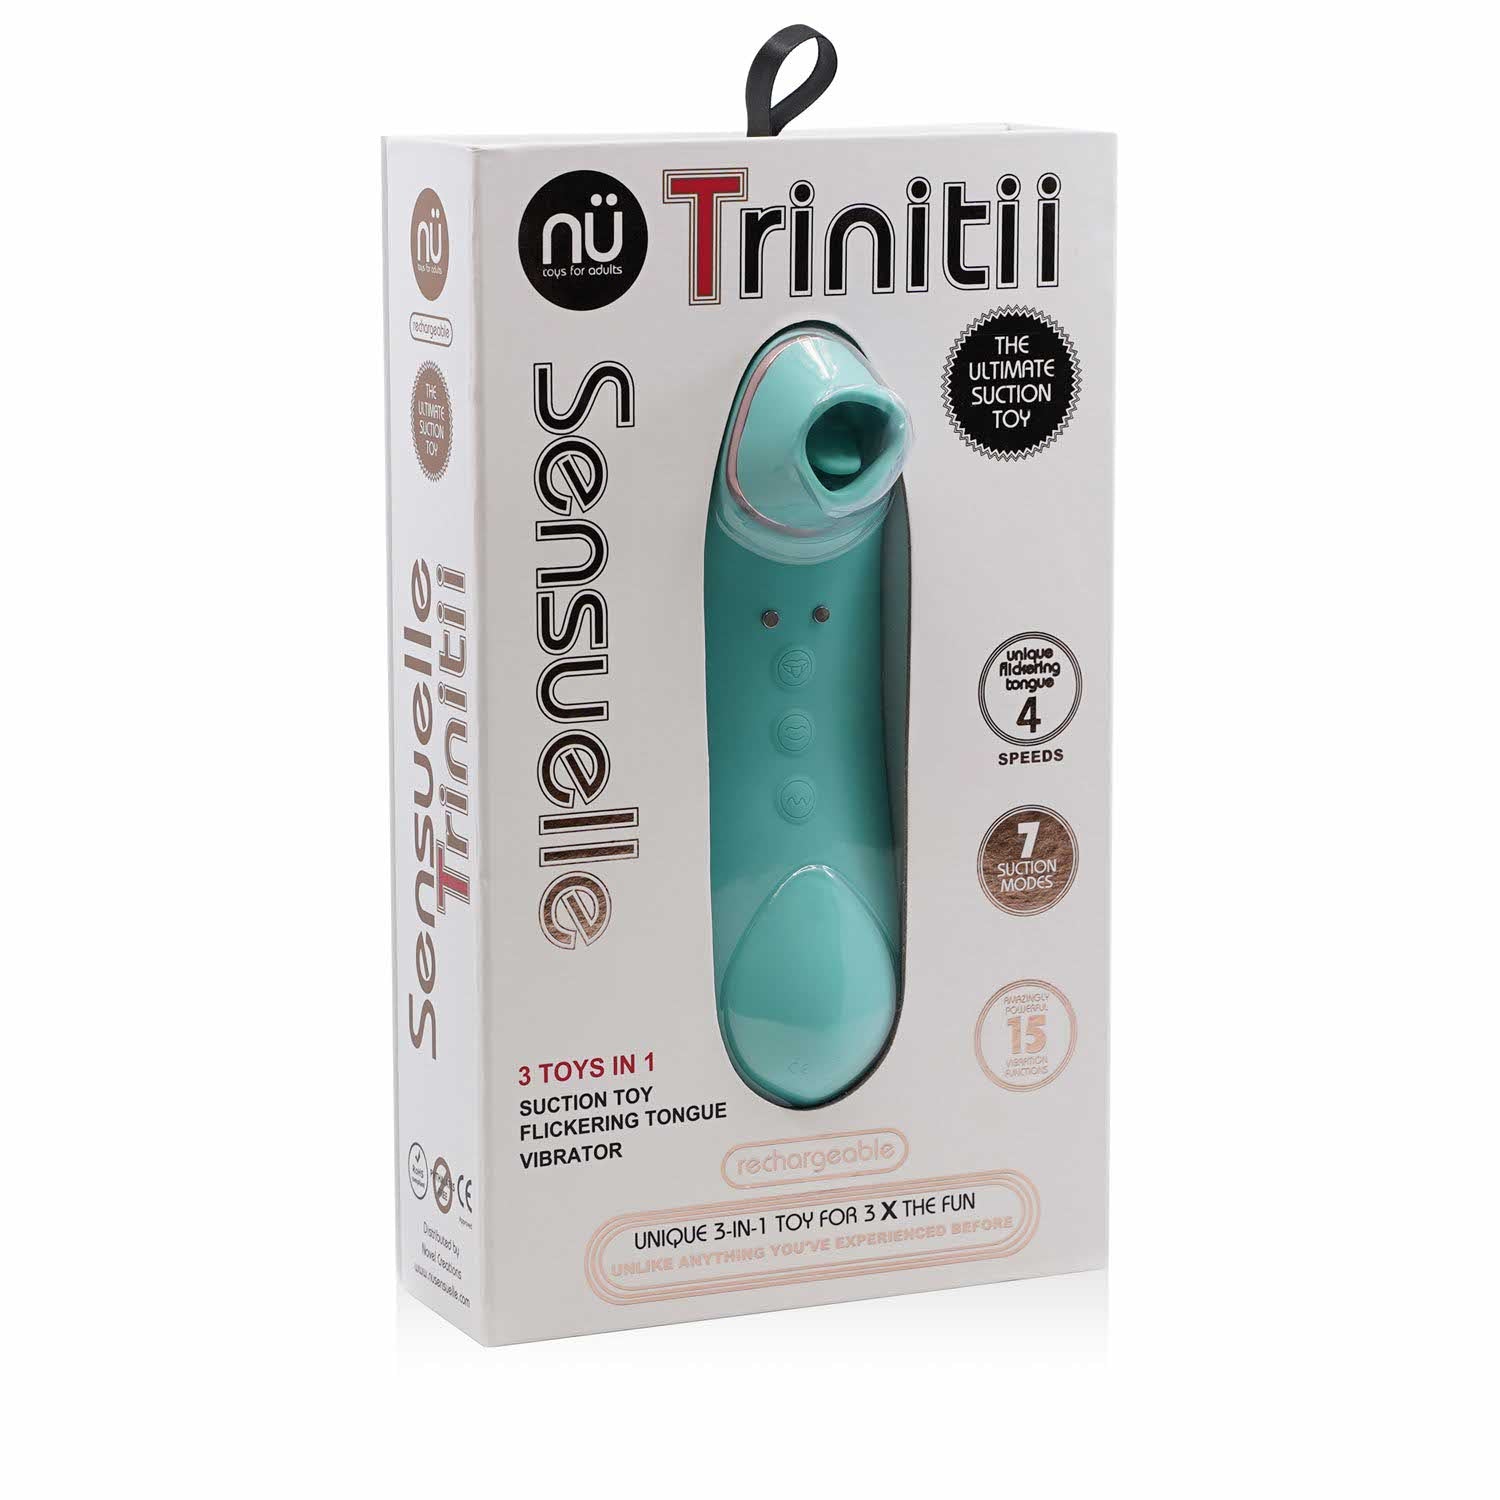 packaging of the nu sensuelle trinitii 26-function rechargeable flickering tongue vibrator with suction bt-w65ebl electric blue